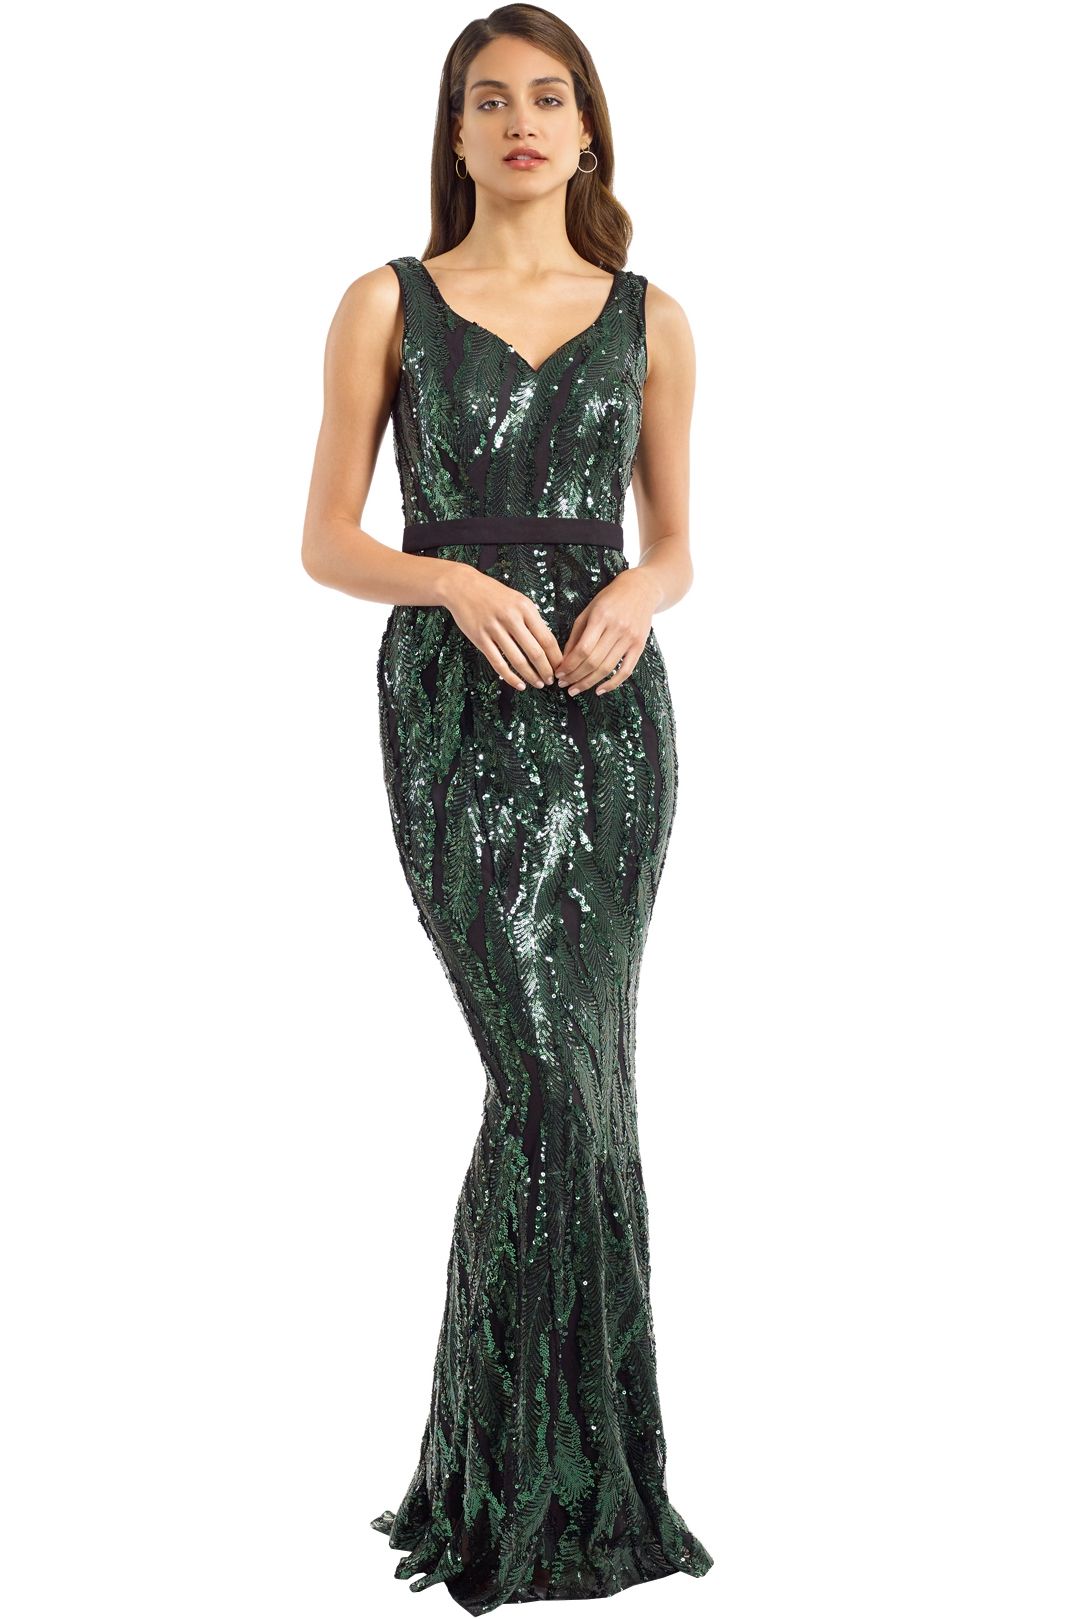 Jadore - J9027 - Aria Gown - Forest - Front